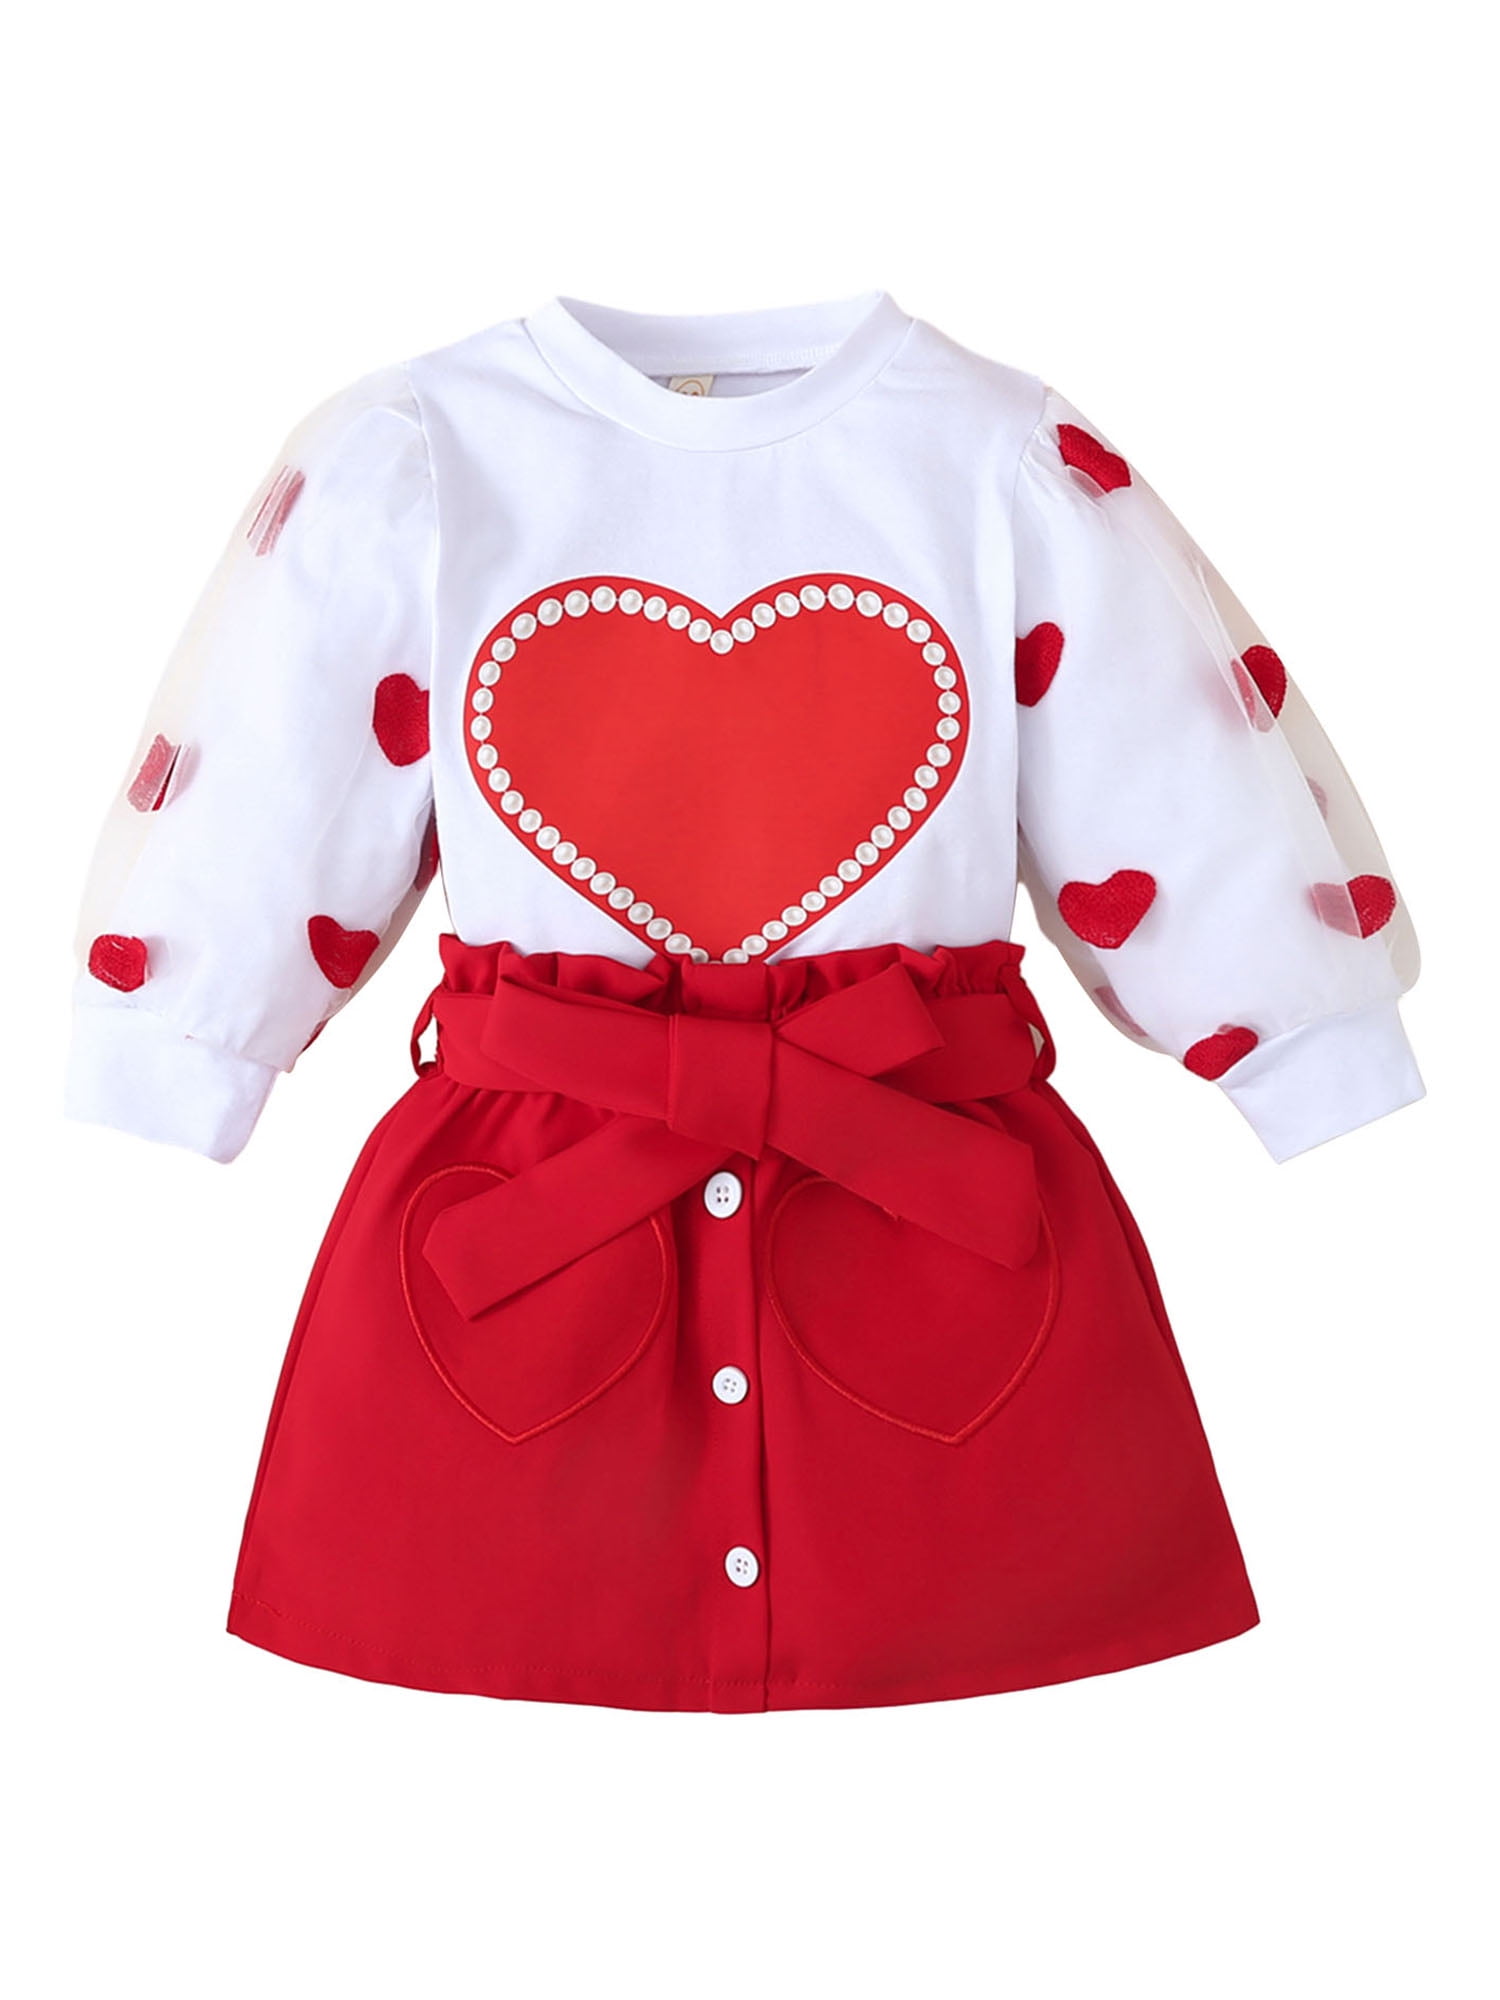 Suealasg Kids Girl Valentine’s Day Outfits 2Pcs Toddler Baby Girl ...